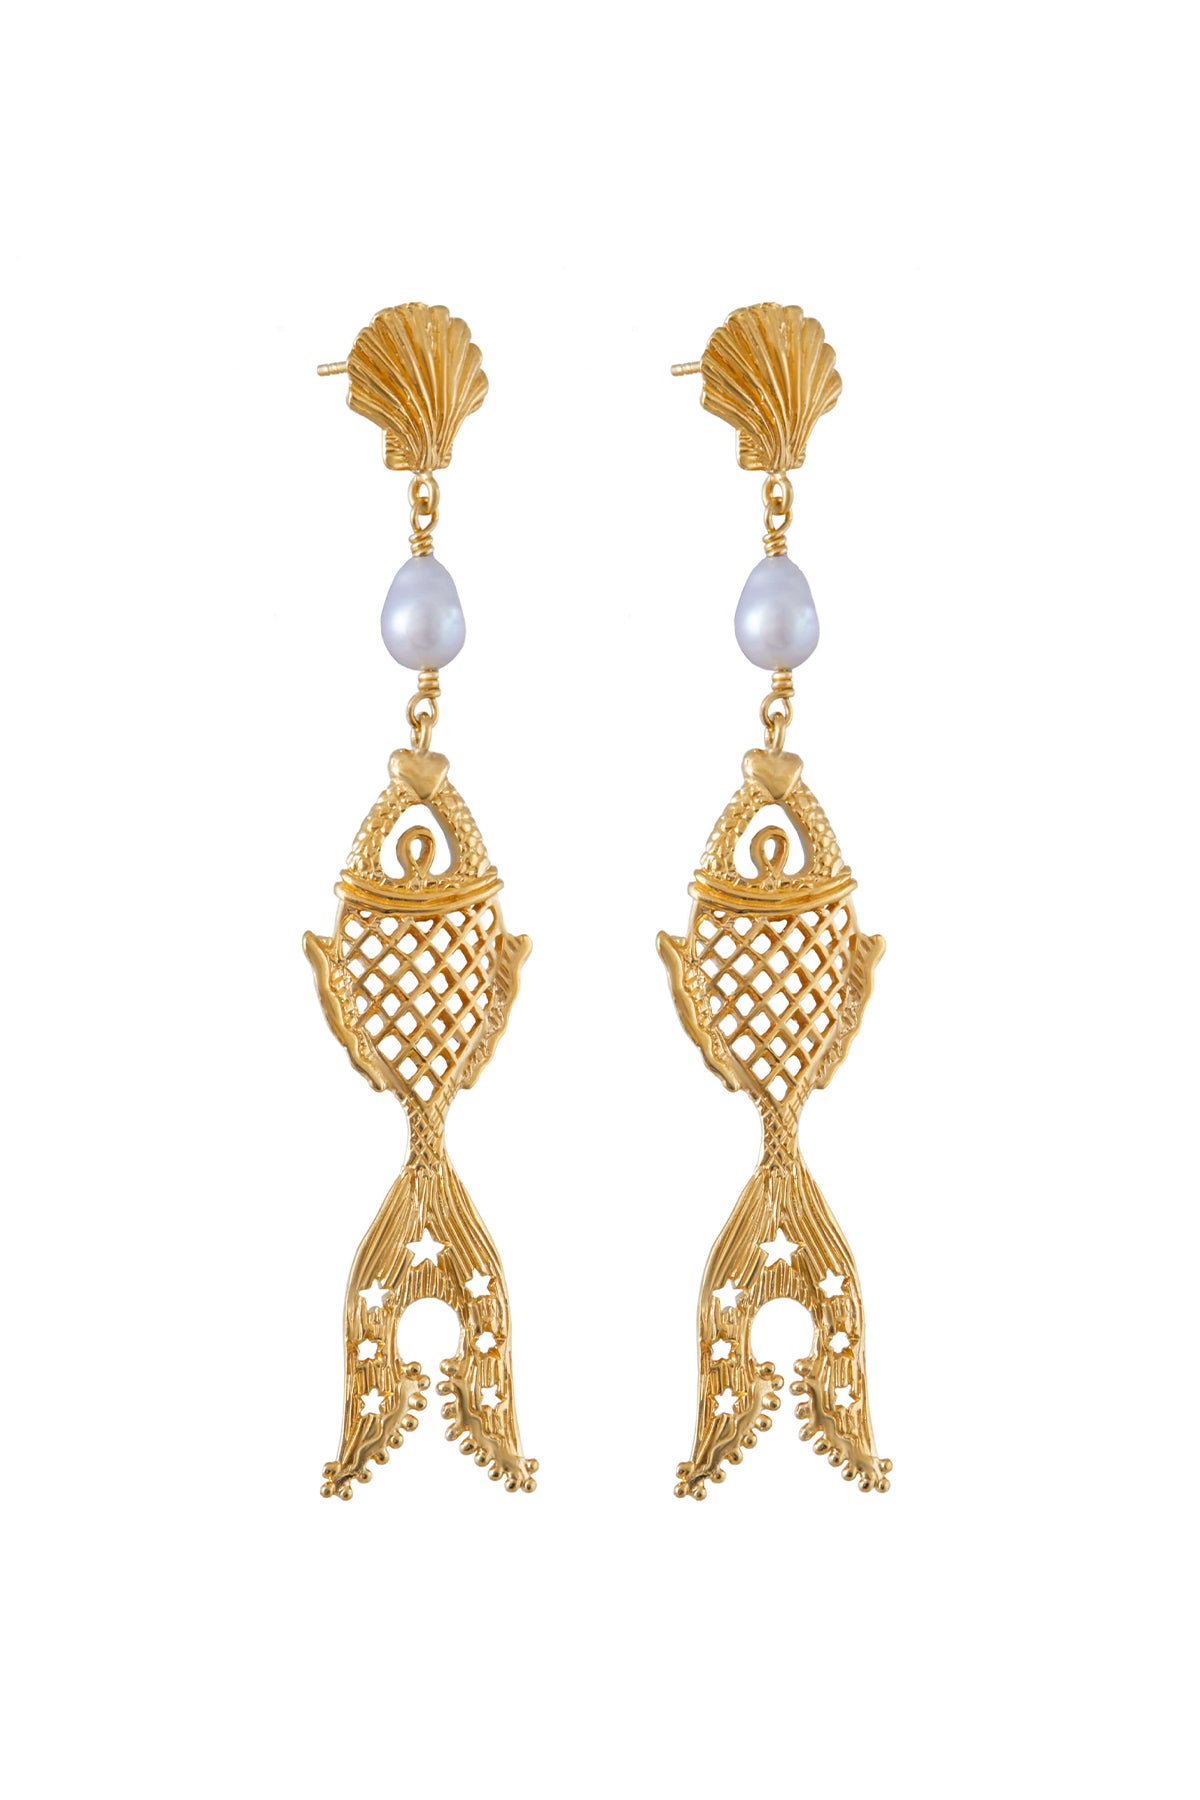 Golden fish with clam and pearl earrings. Silver, gold-plated